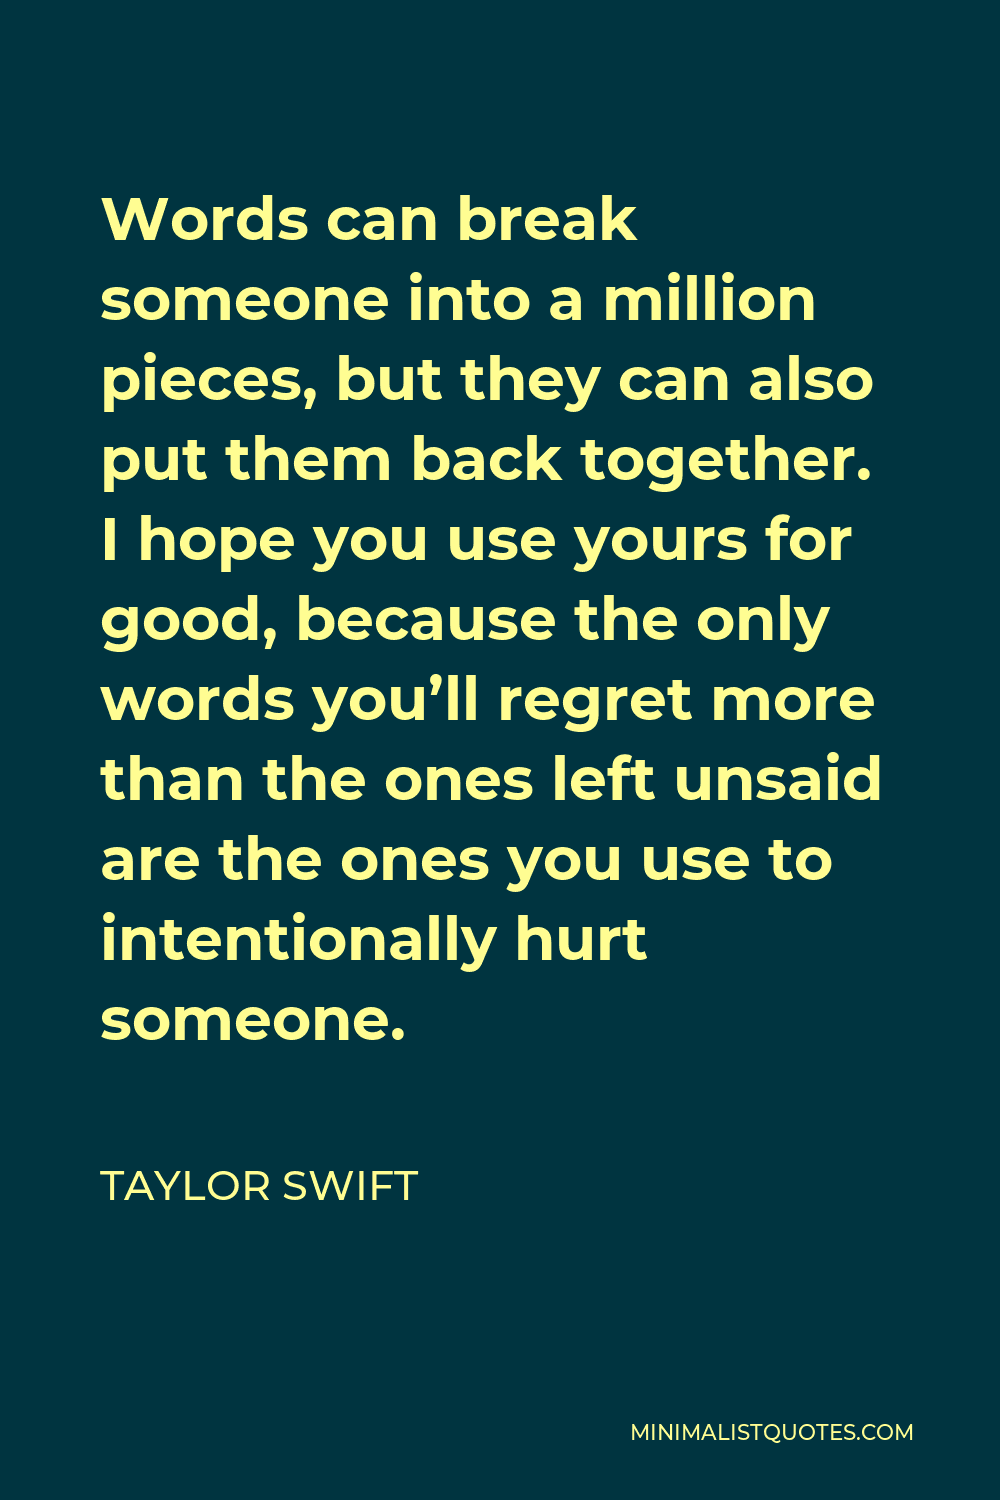 Taylor Swift Quote - Words can break someone into a million pieces, but they can also put them back together. I hope you use yours for good, because the only words you’ll regret more than the ones left unsaid are the ones you use to intentionally hurt someone.